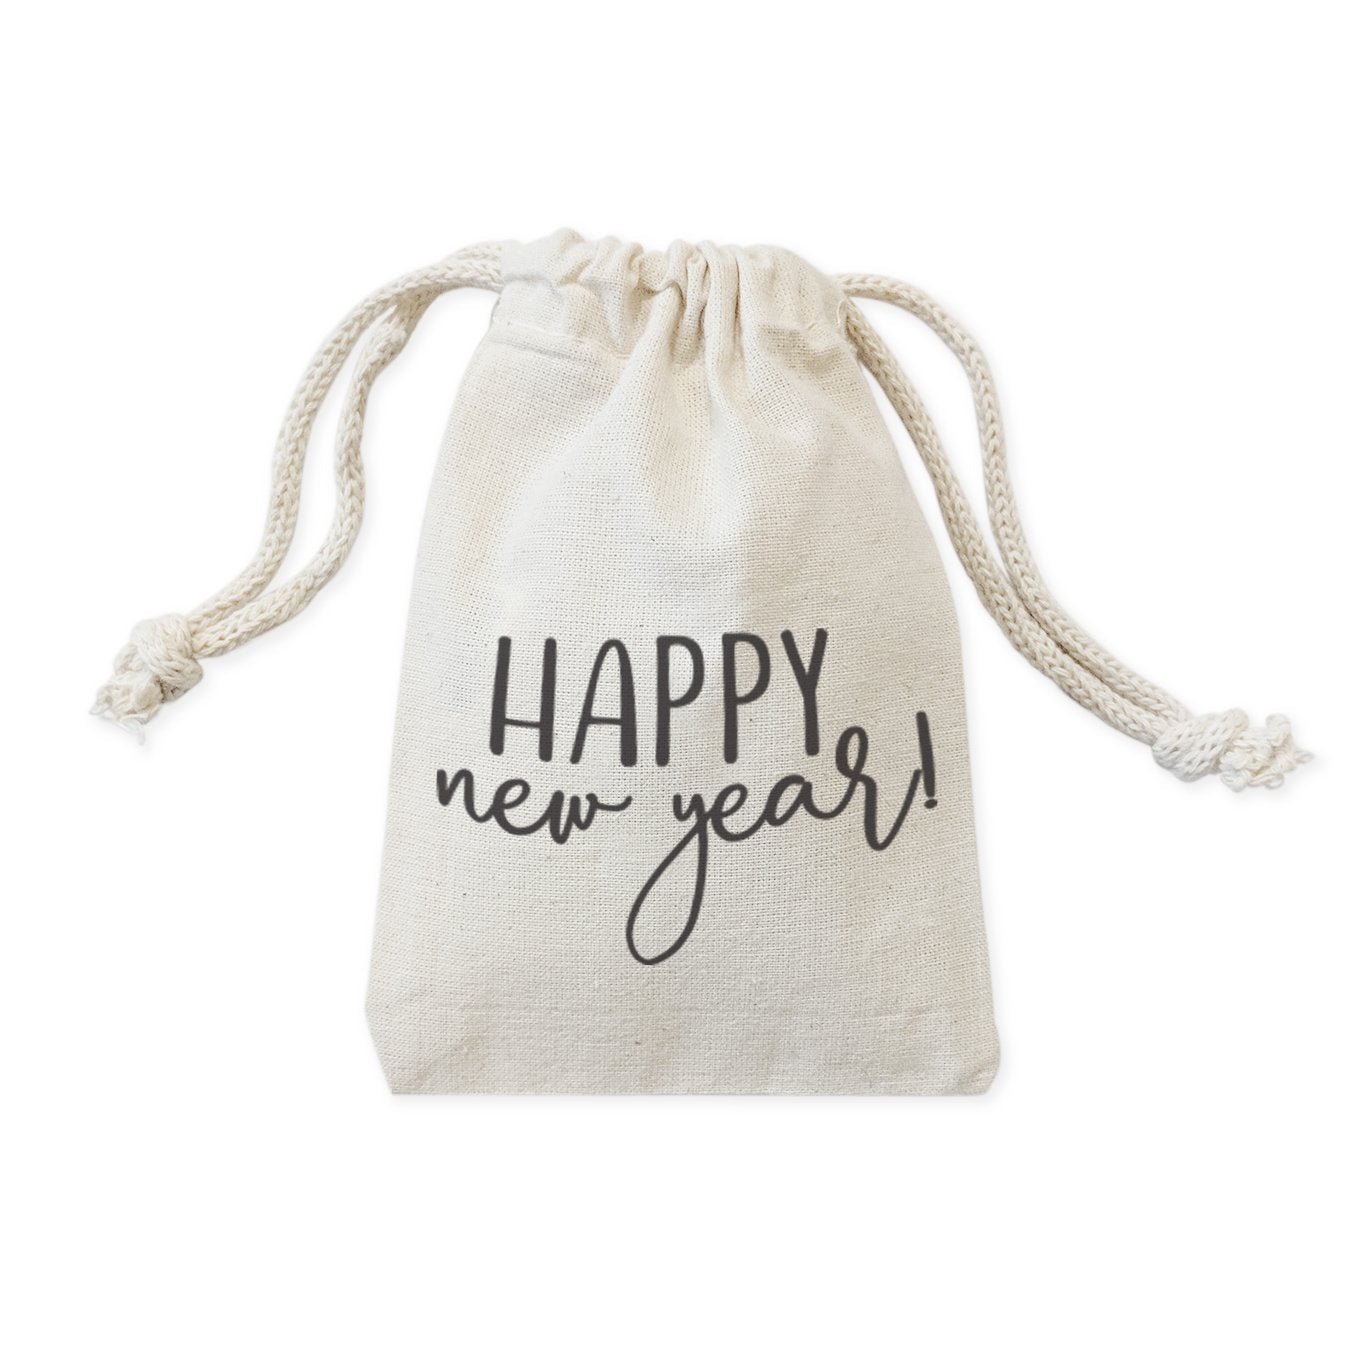 Happy New Year! Holiday Favor Bags, 6-Pack